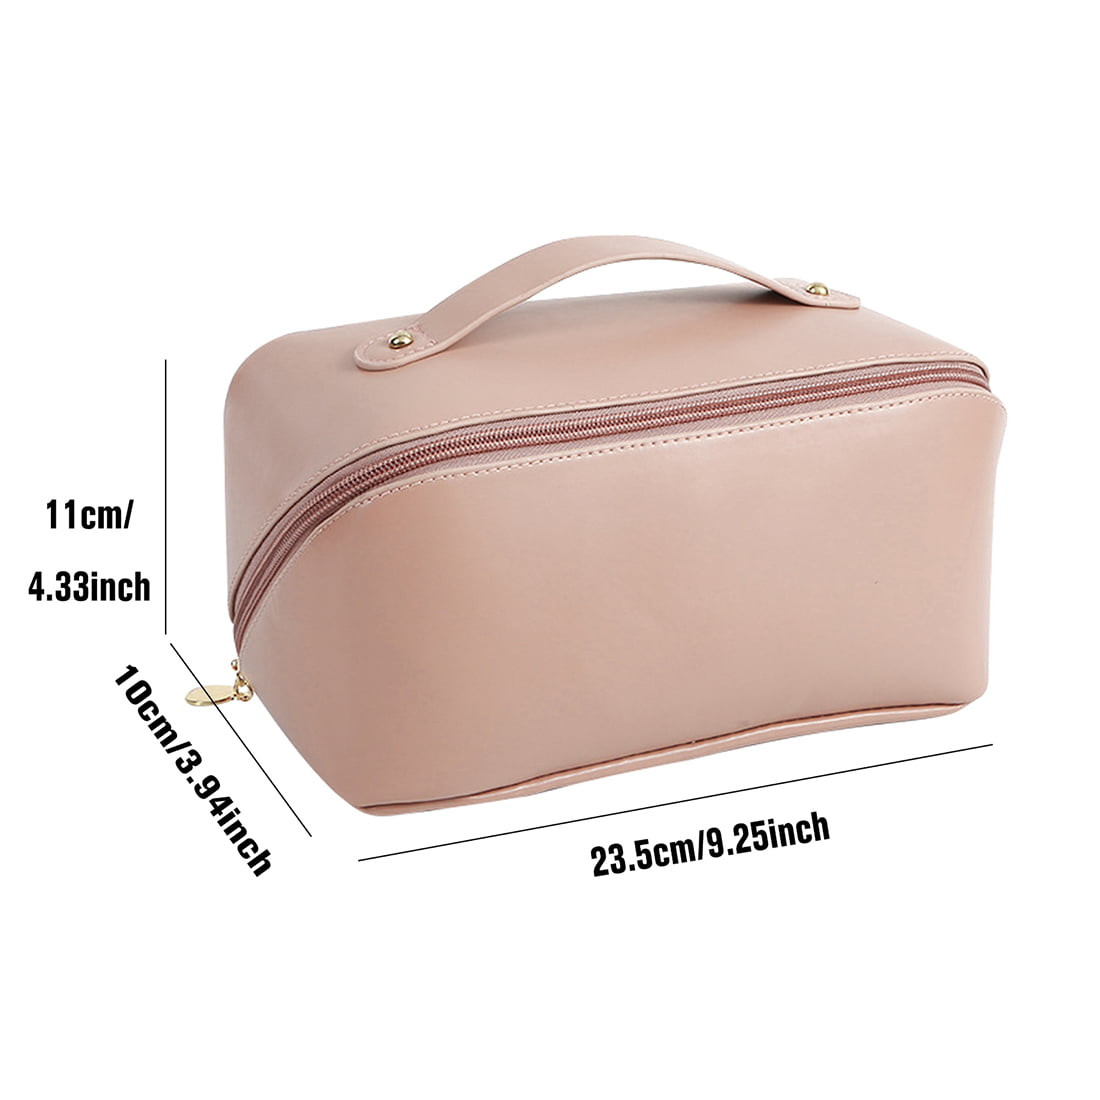 Make-up Pouch Mix Colors PU Leather Travel Cosmetic Bag for Women's -  22x12x12 Cm - Heavy, For Home